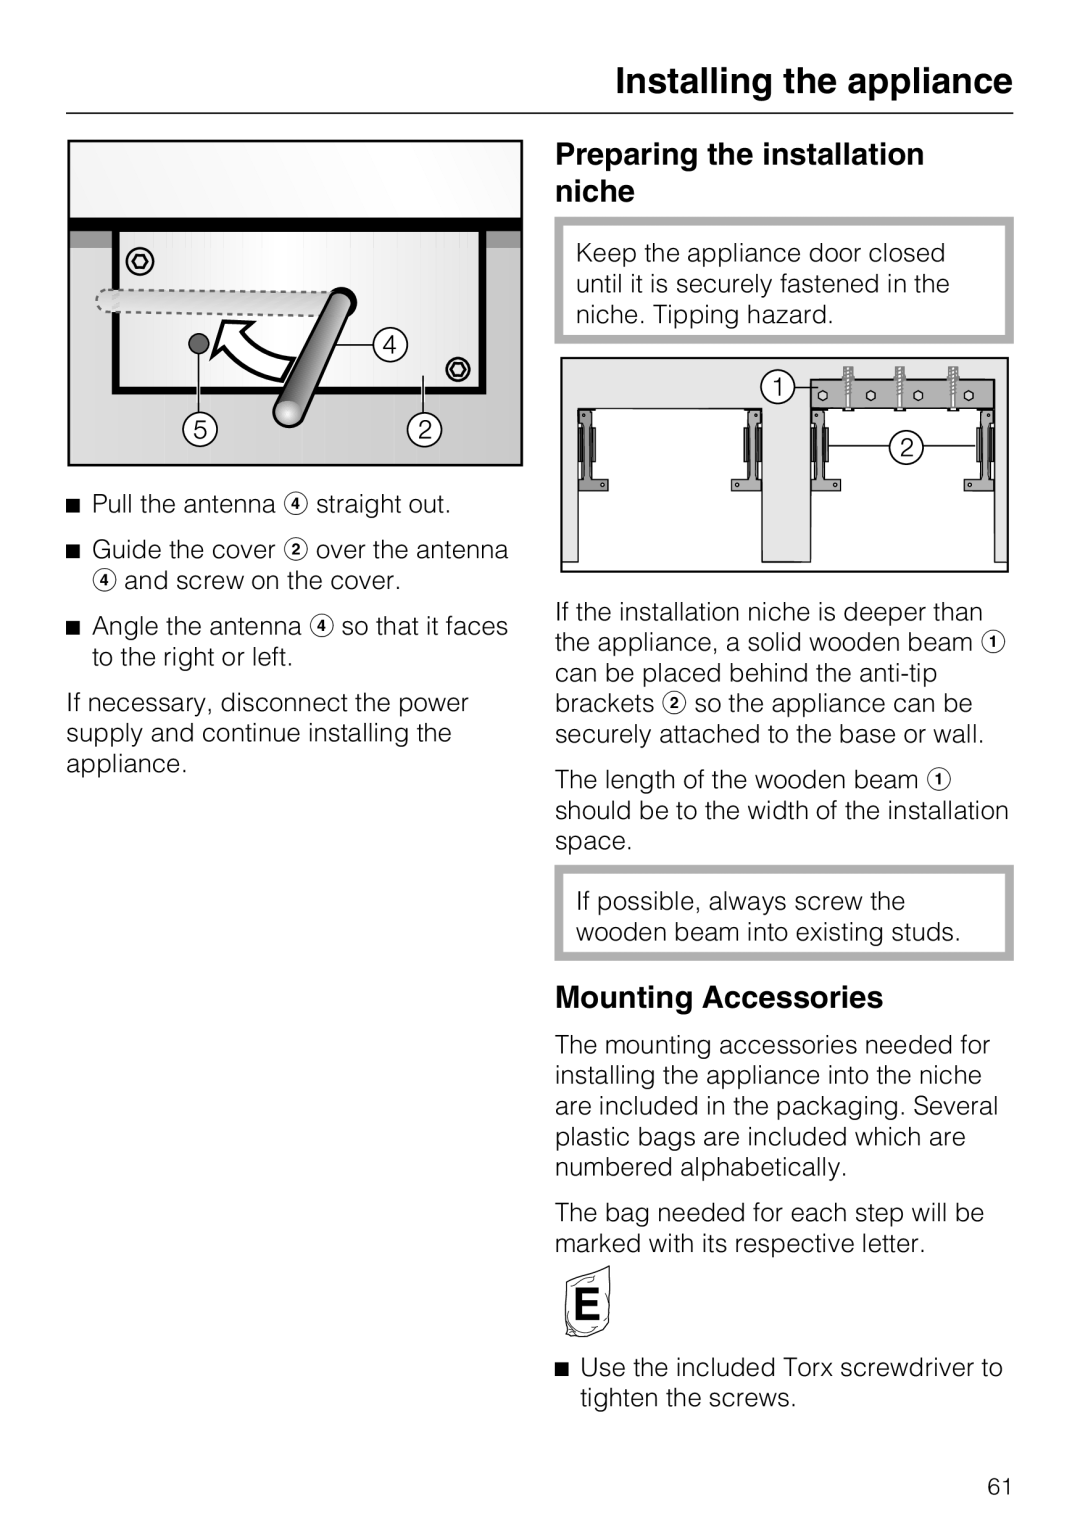 Miele F1471SF installation instructions Preparing the installation niche, Mounting Accessories 